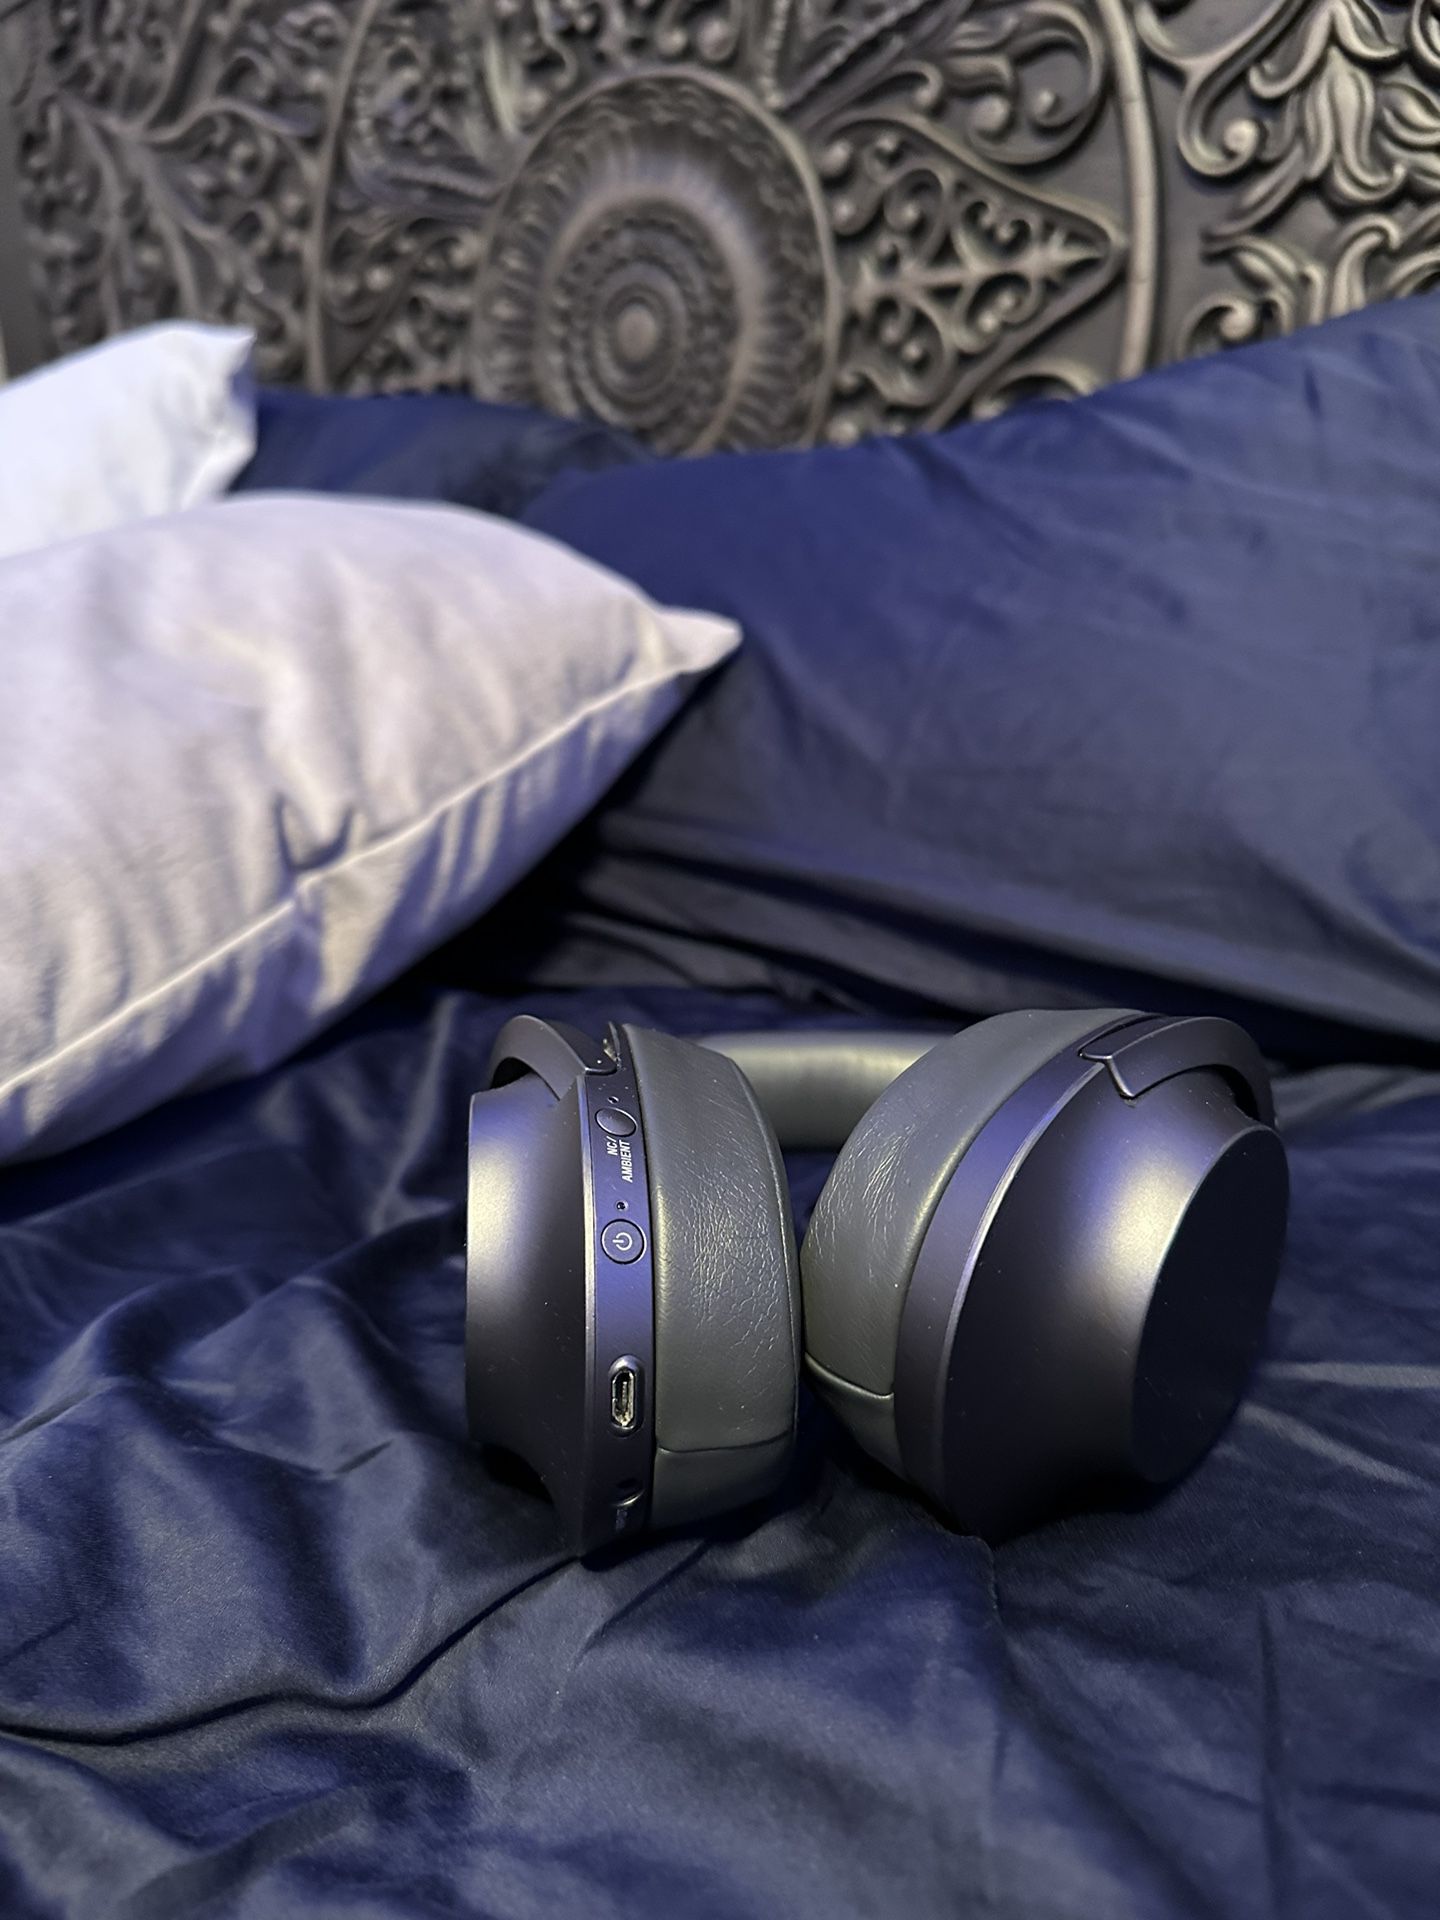 sony wh900n wireless stereo headset